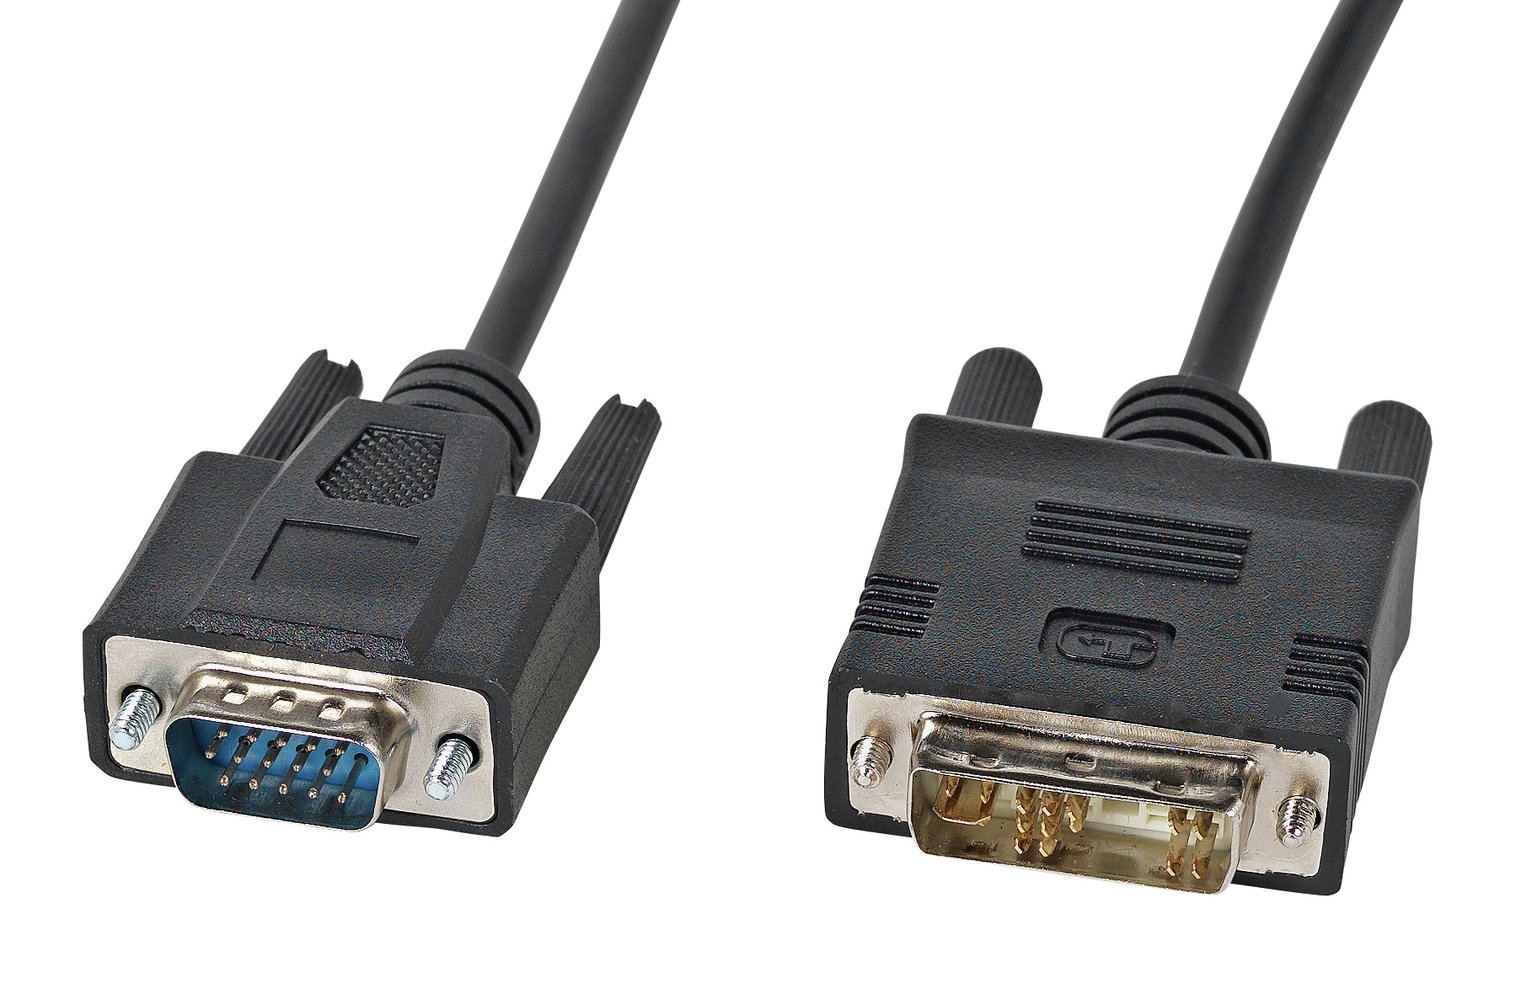 3m DVI to VGA Cable Review